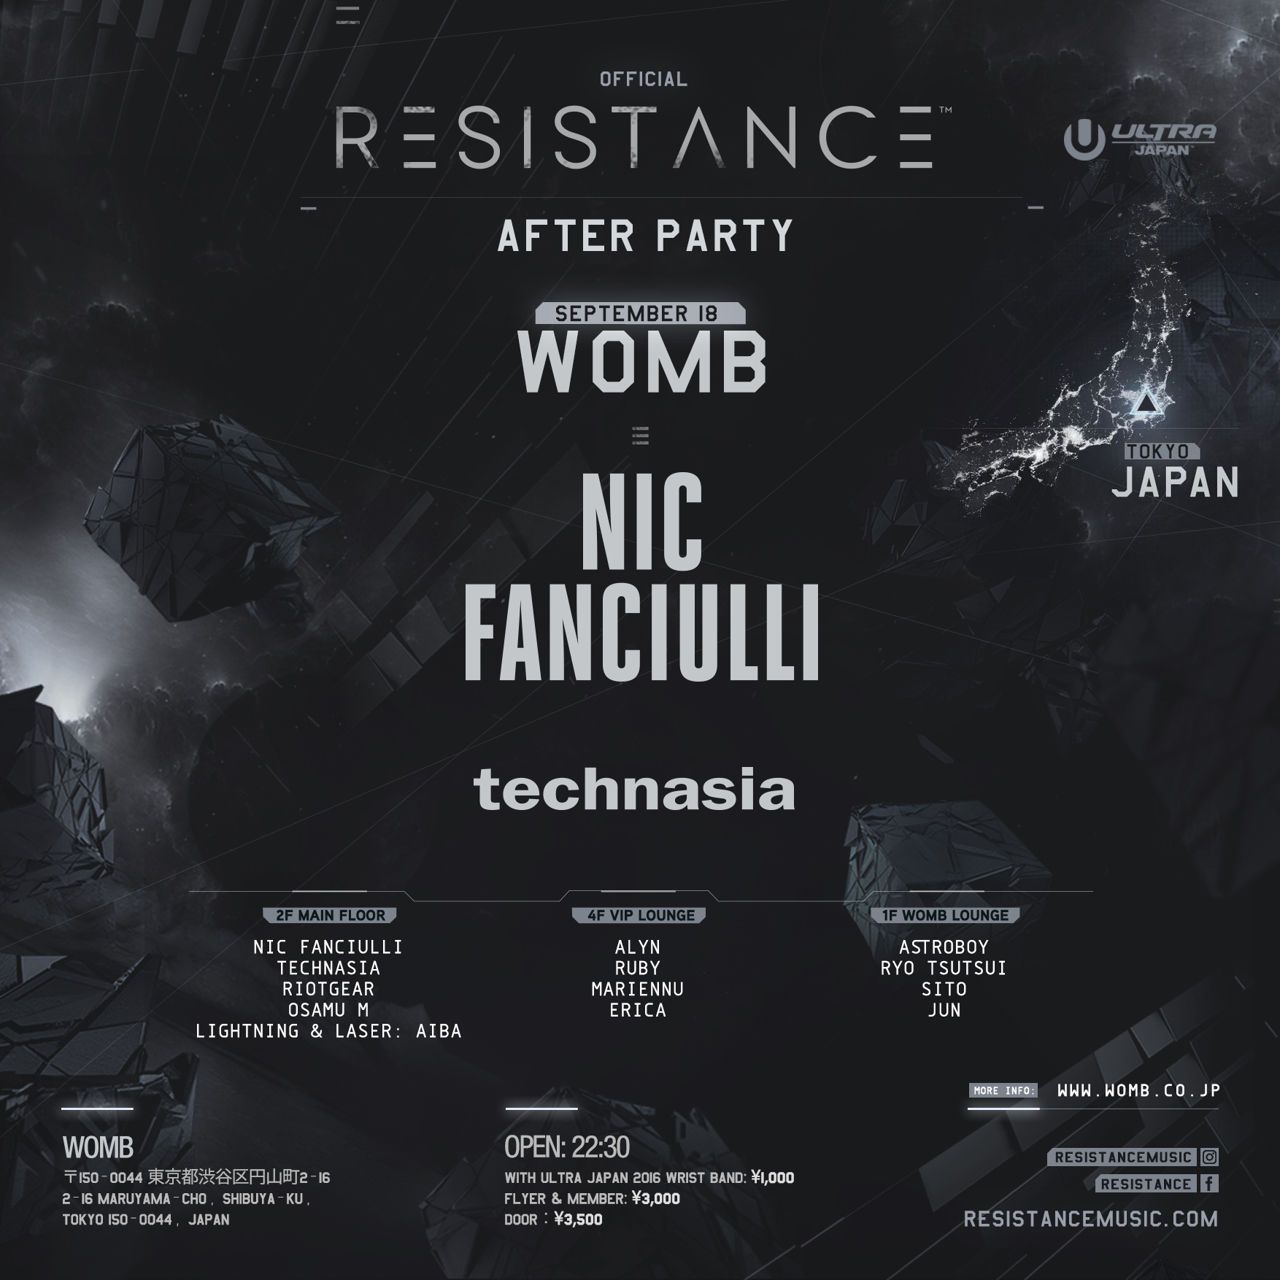 ULTRA JAPAN RESISTANCE OFFICIAL AFTER PARTY